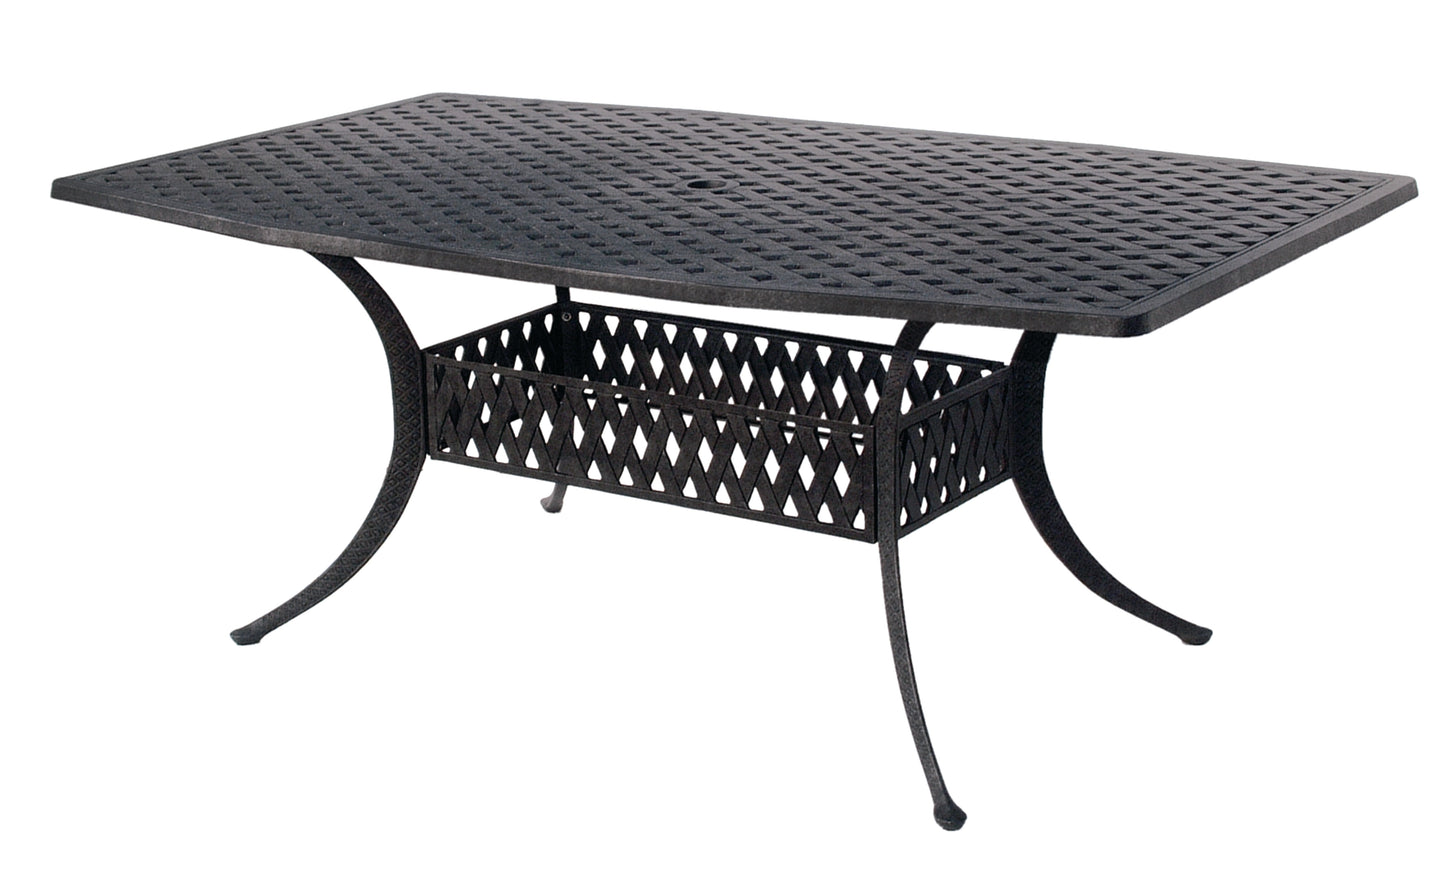 Click to View all Coordinate Tables & Accessories